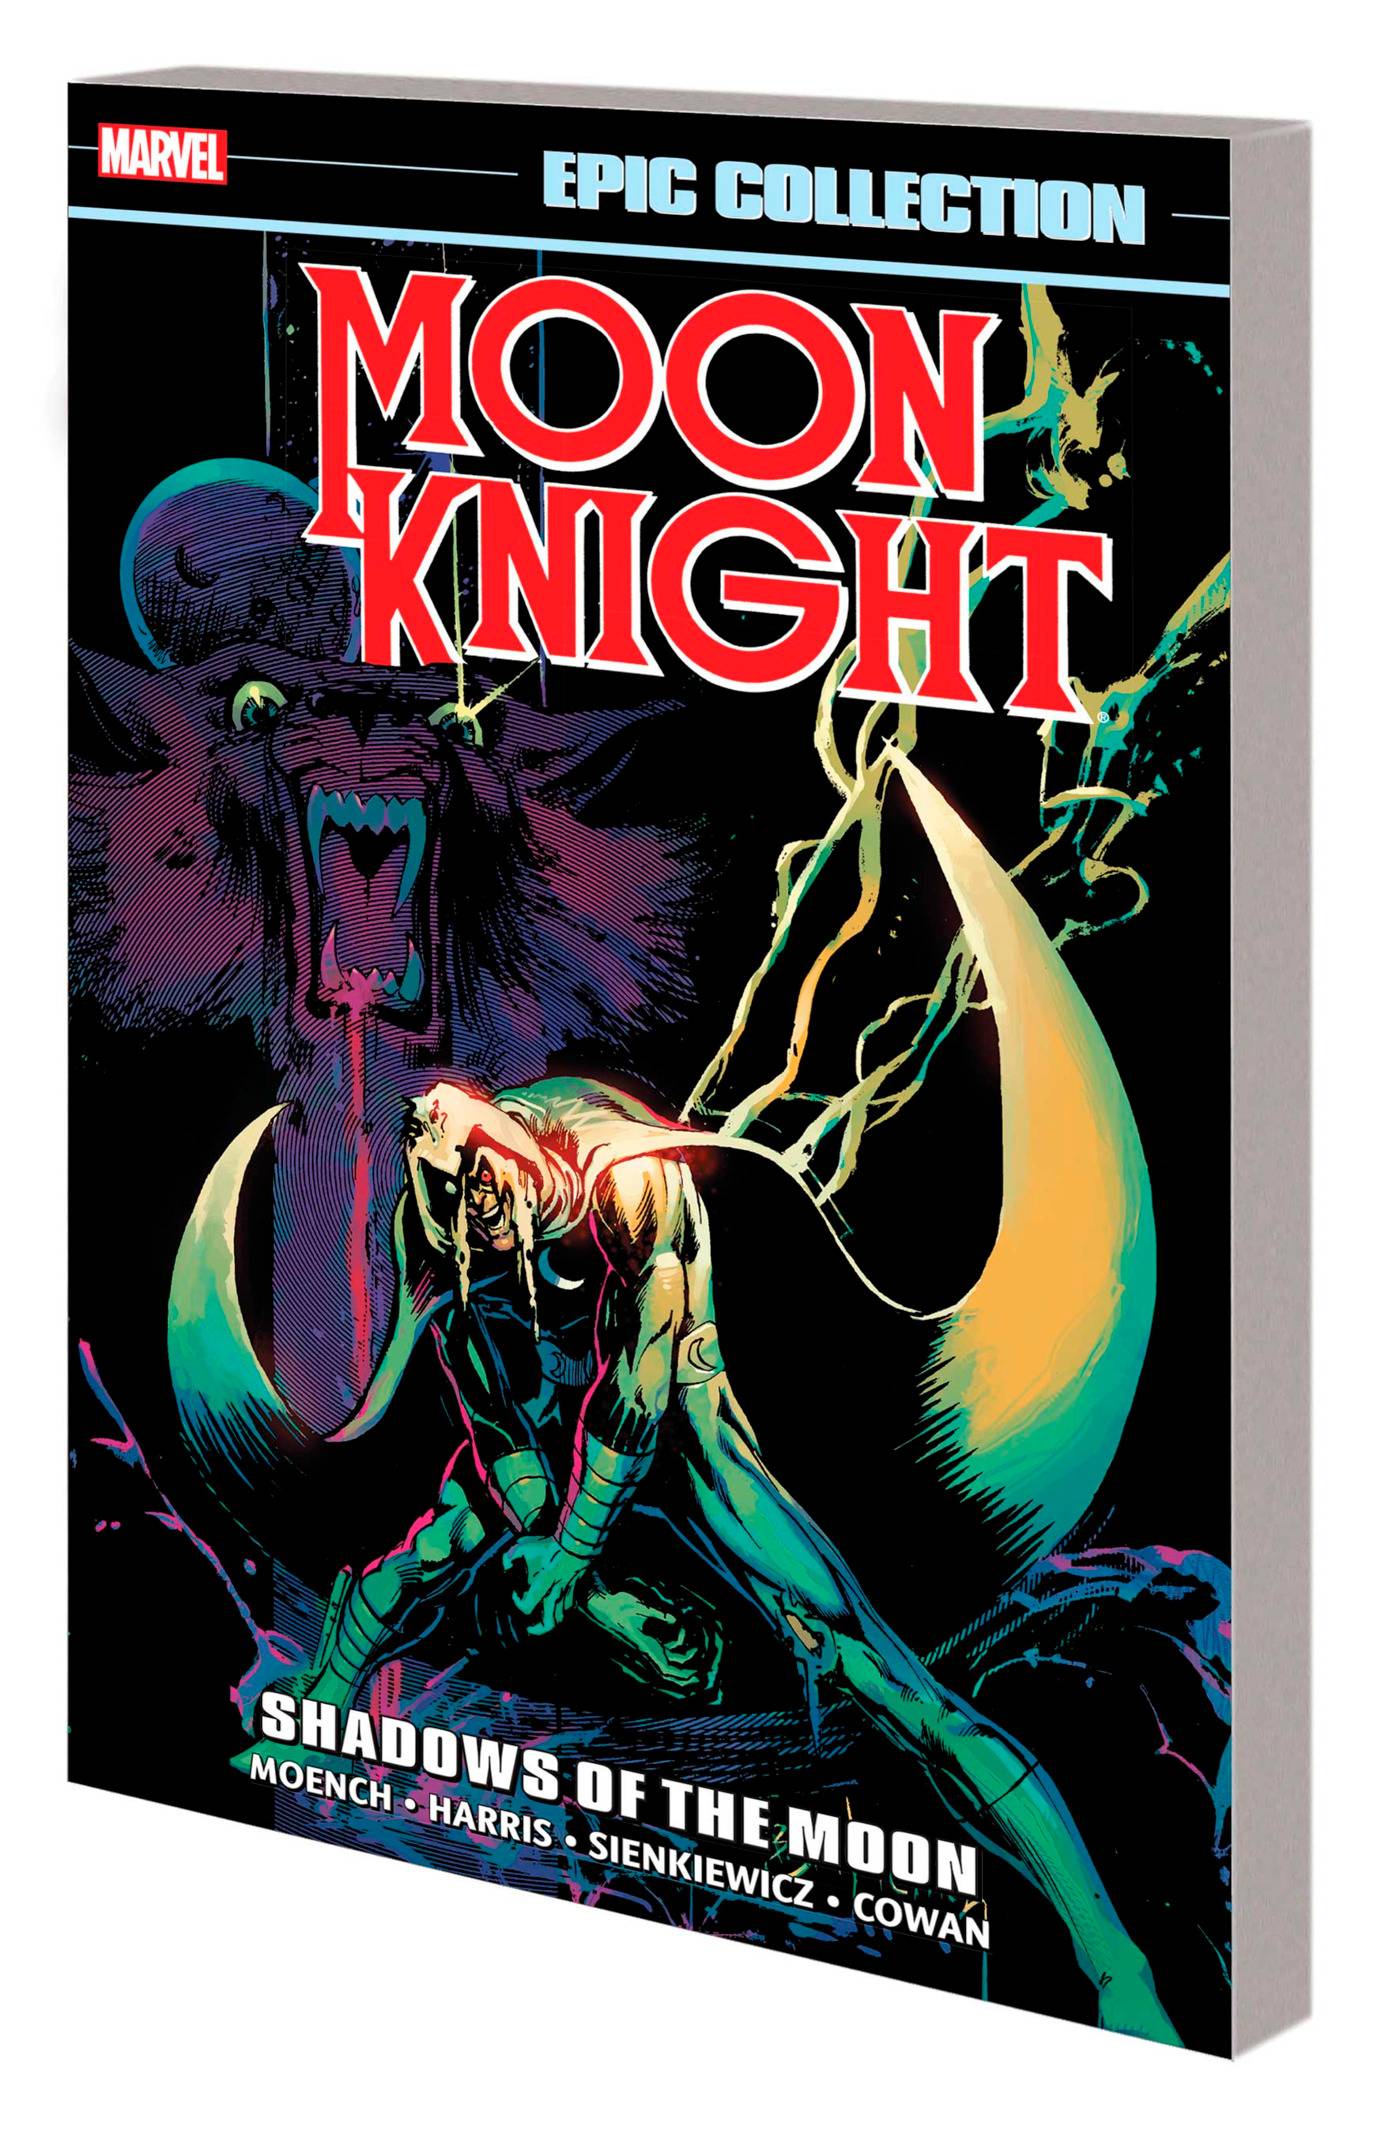 MOON KNIGHT EPIC COLLECTION TP SHADOWS OF MOON NEW PTG